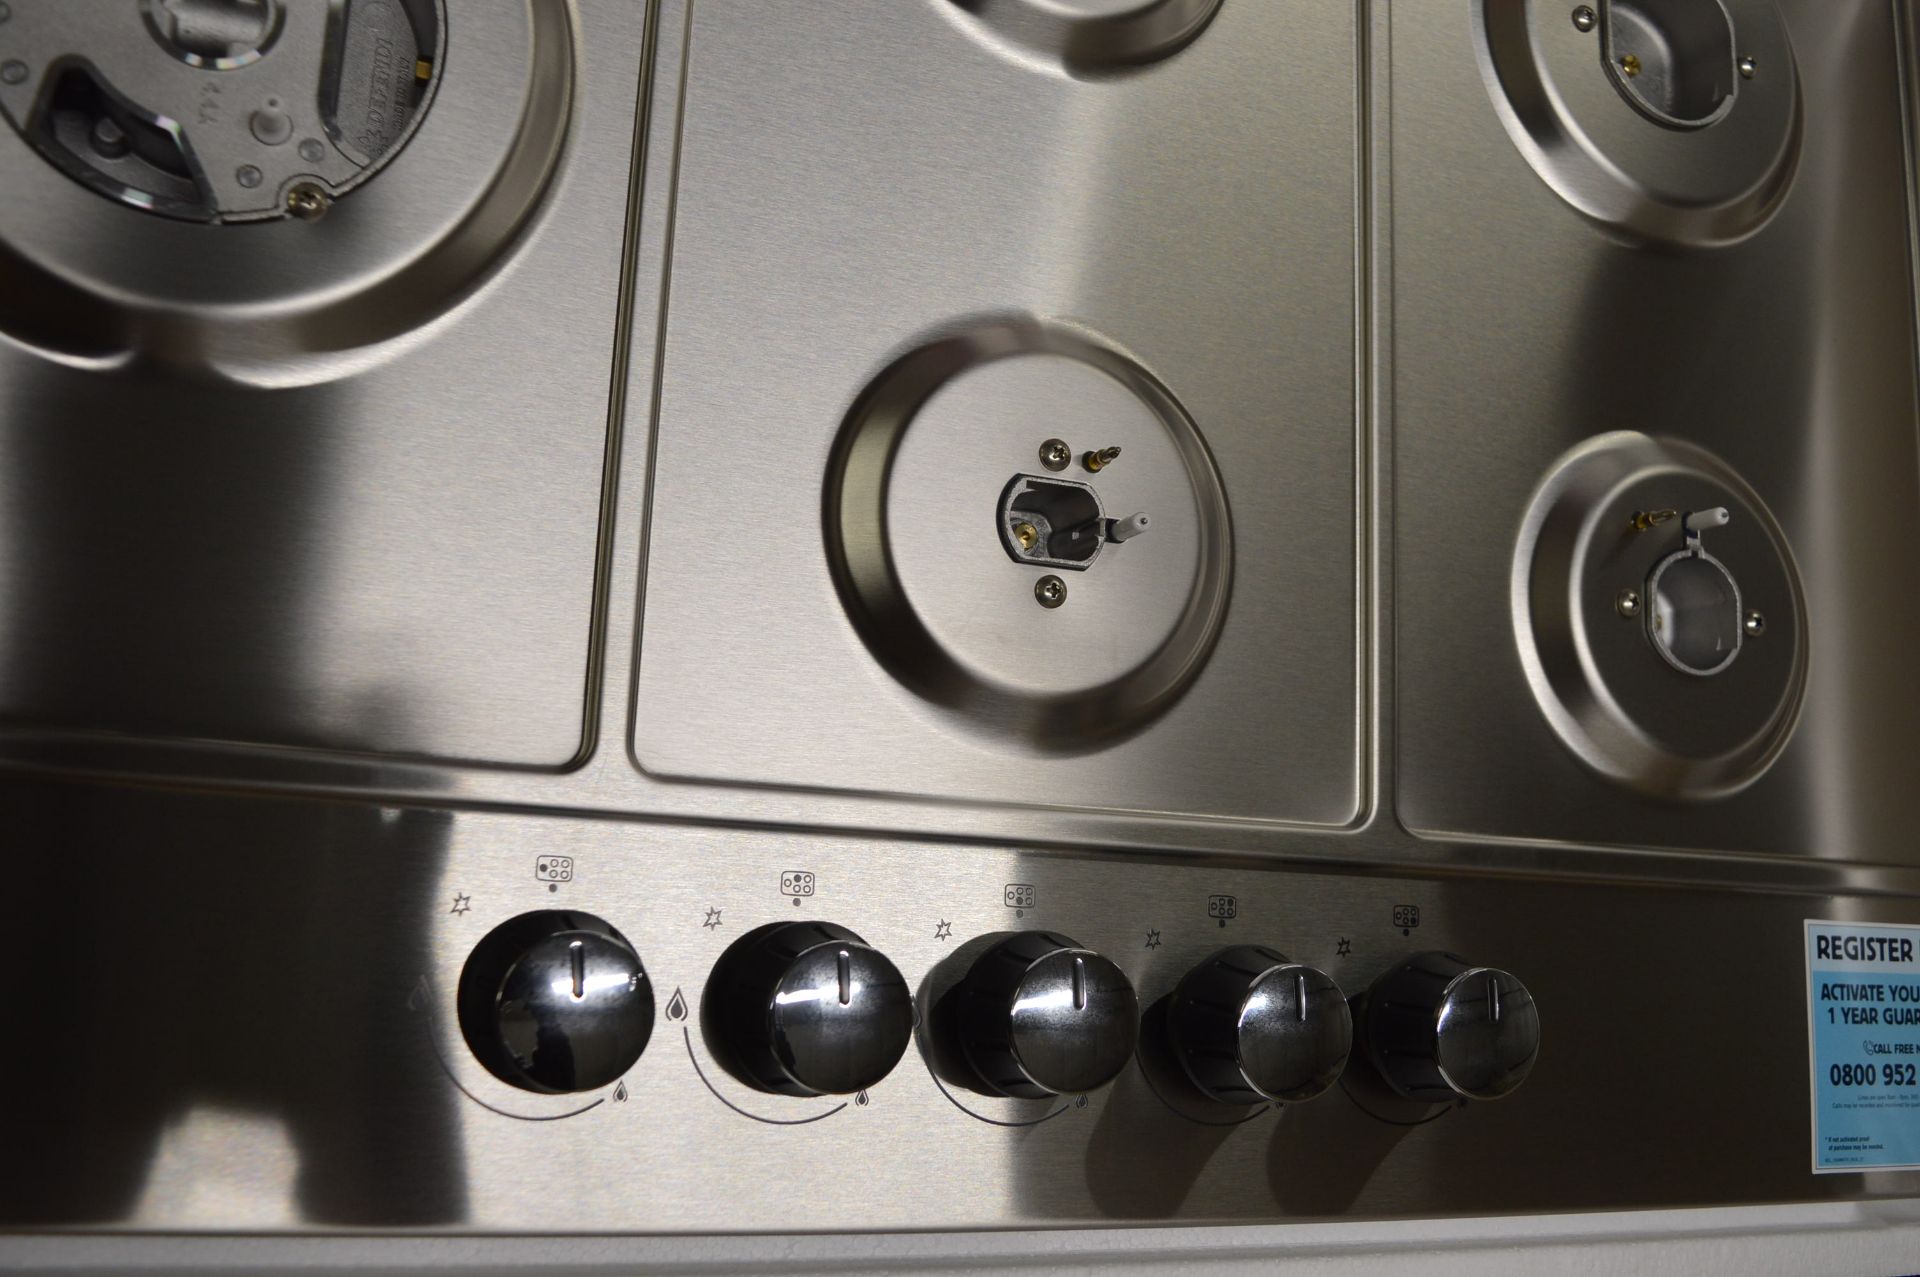 Belling Stainless Steel Built-In Gas Hob - Image 4 of 6